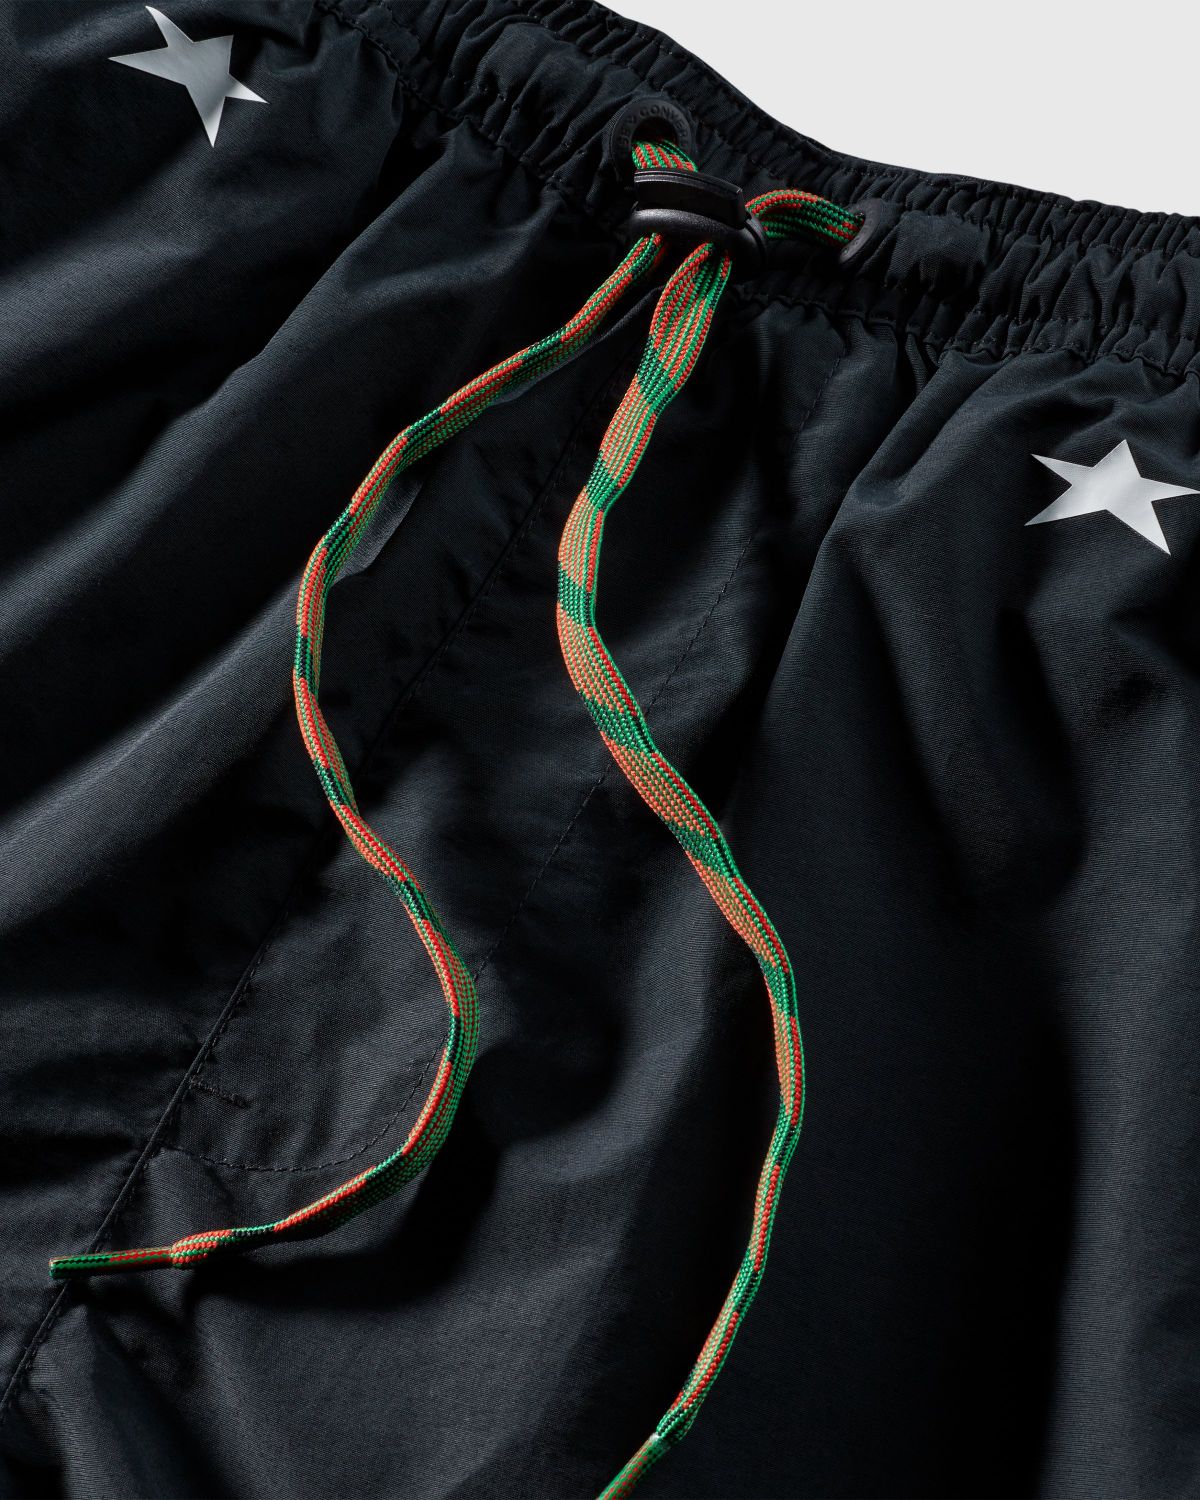 Converse x Barriers – Court Ready Cutter Shorts Black - Shorts - Black - Image 4